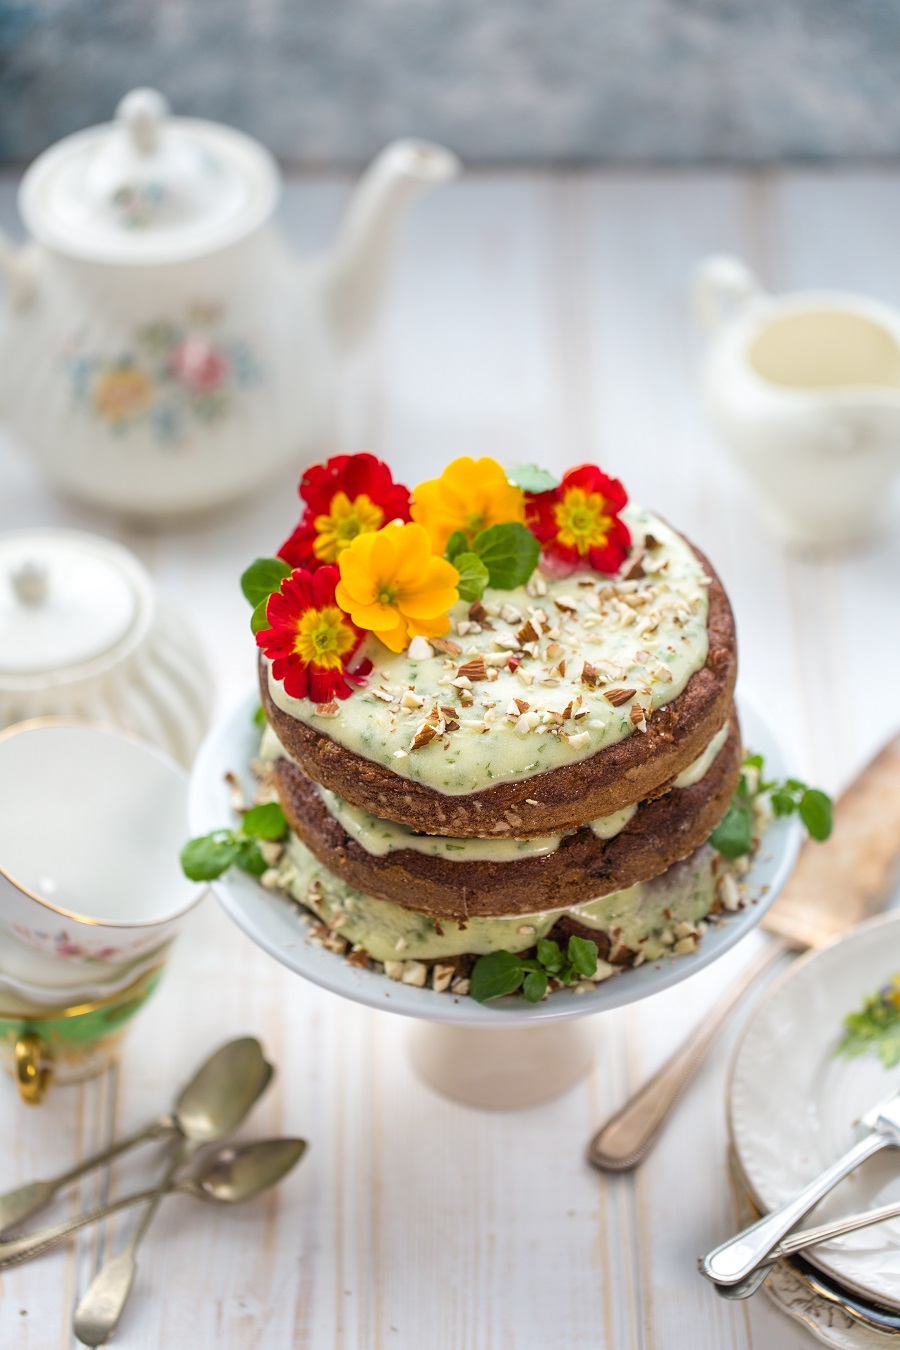 Carrot Cake with Watercress & Cream Cheese Frosting